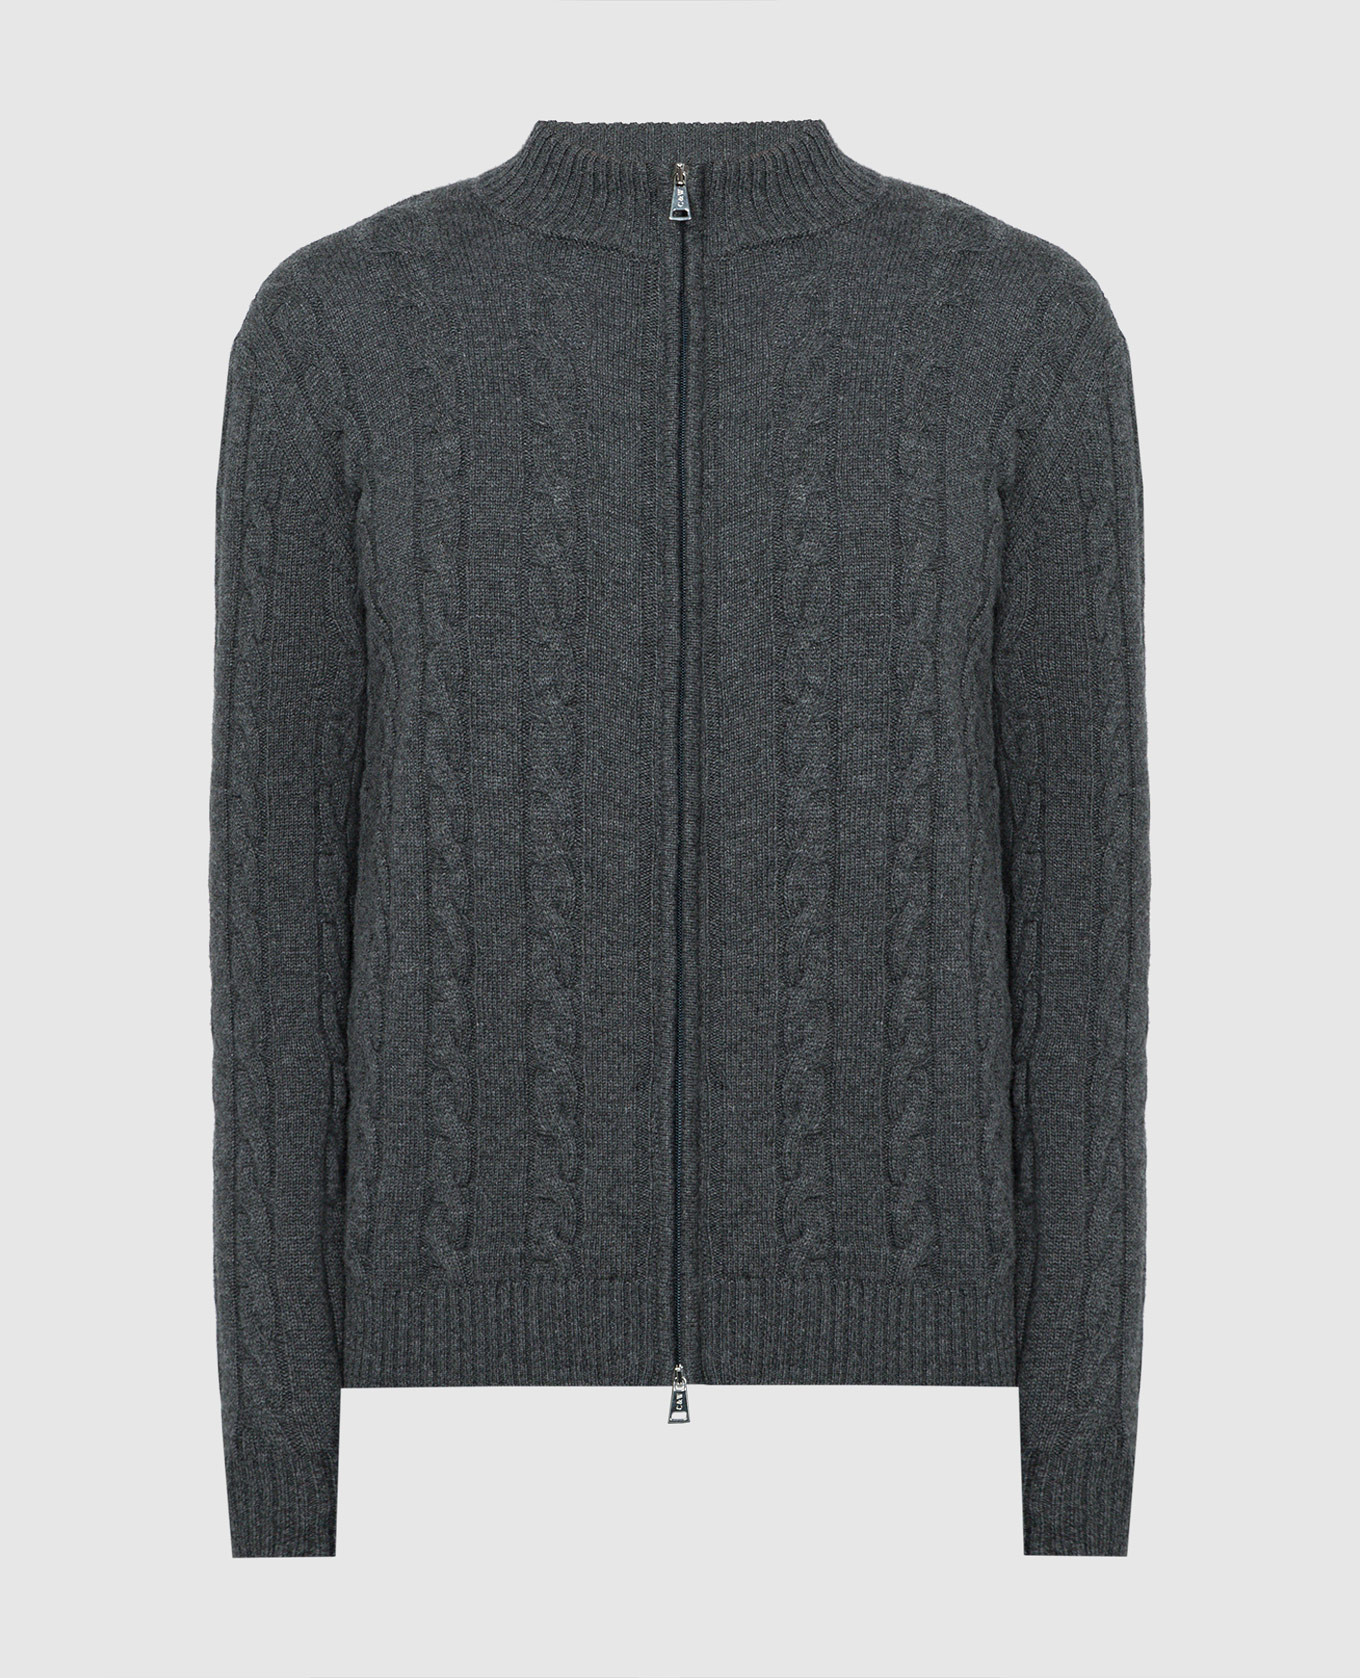 Gray cashmere cardigan in a textured pattern